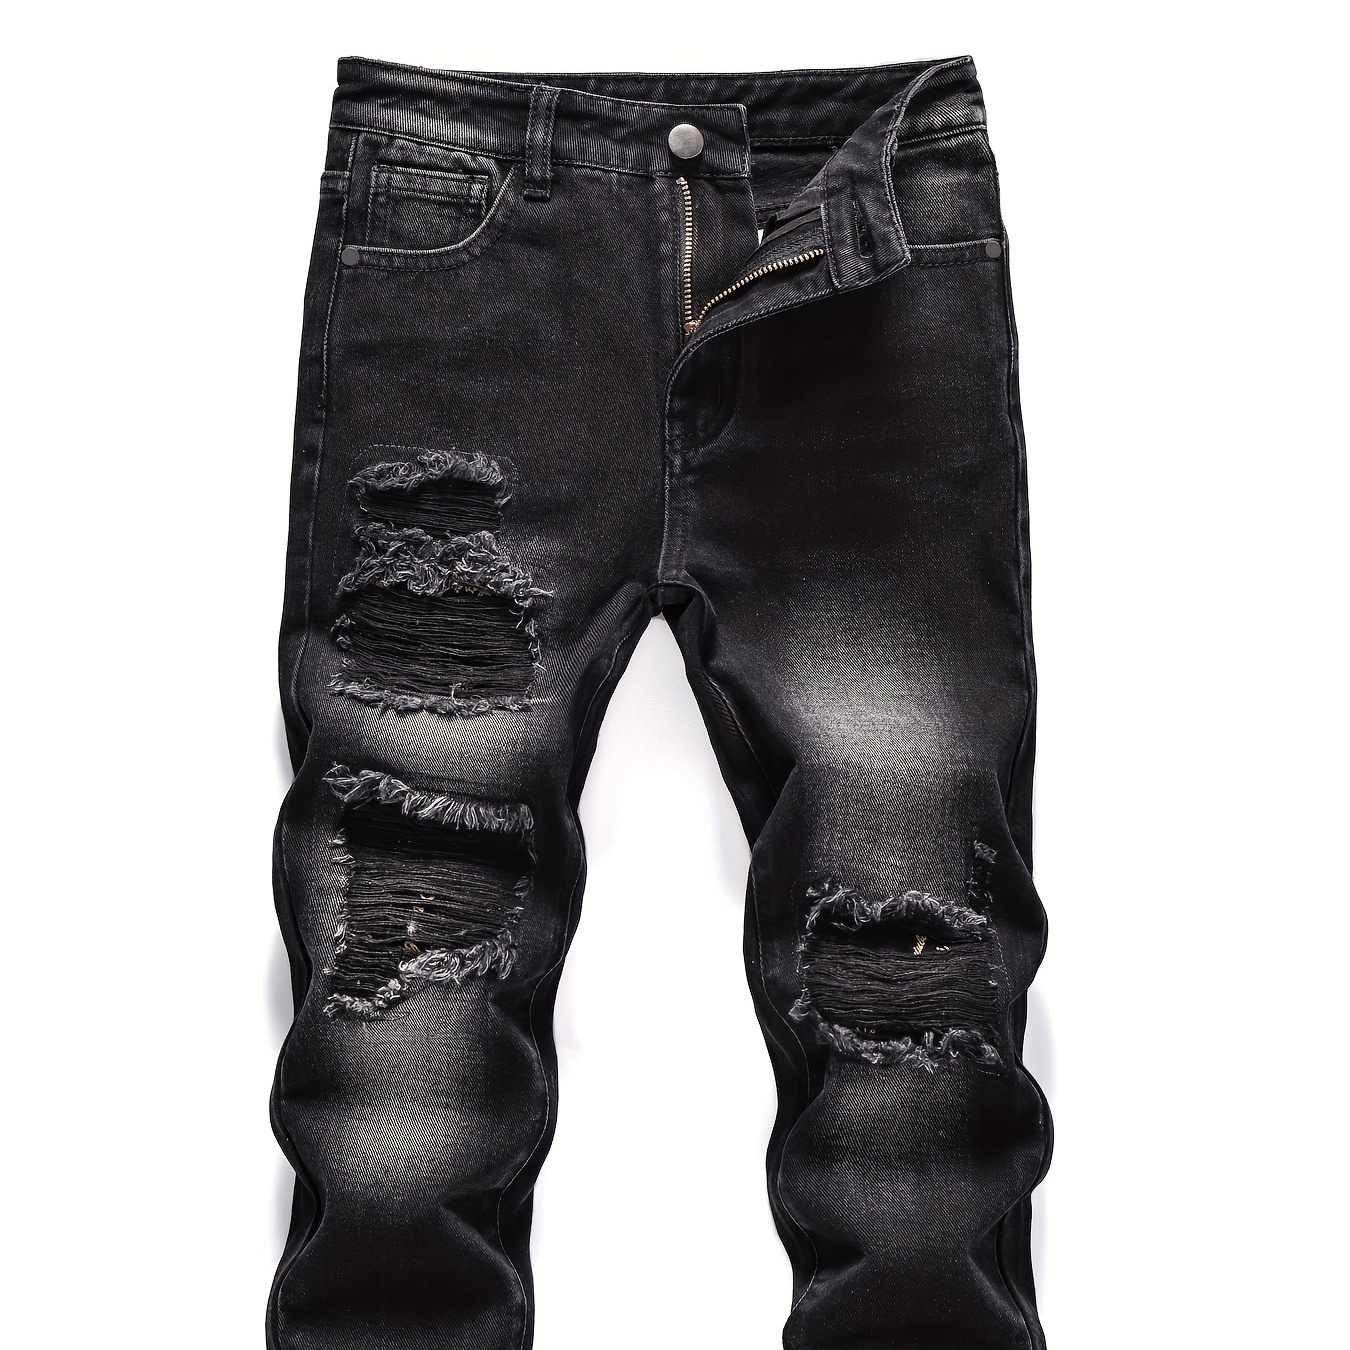 

Kid's Ripped Black Jeans, Street Style Denim Pants For Cool Boys, Boy's Clothes For All Seasons